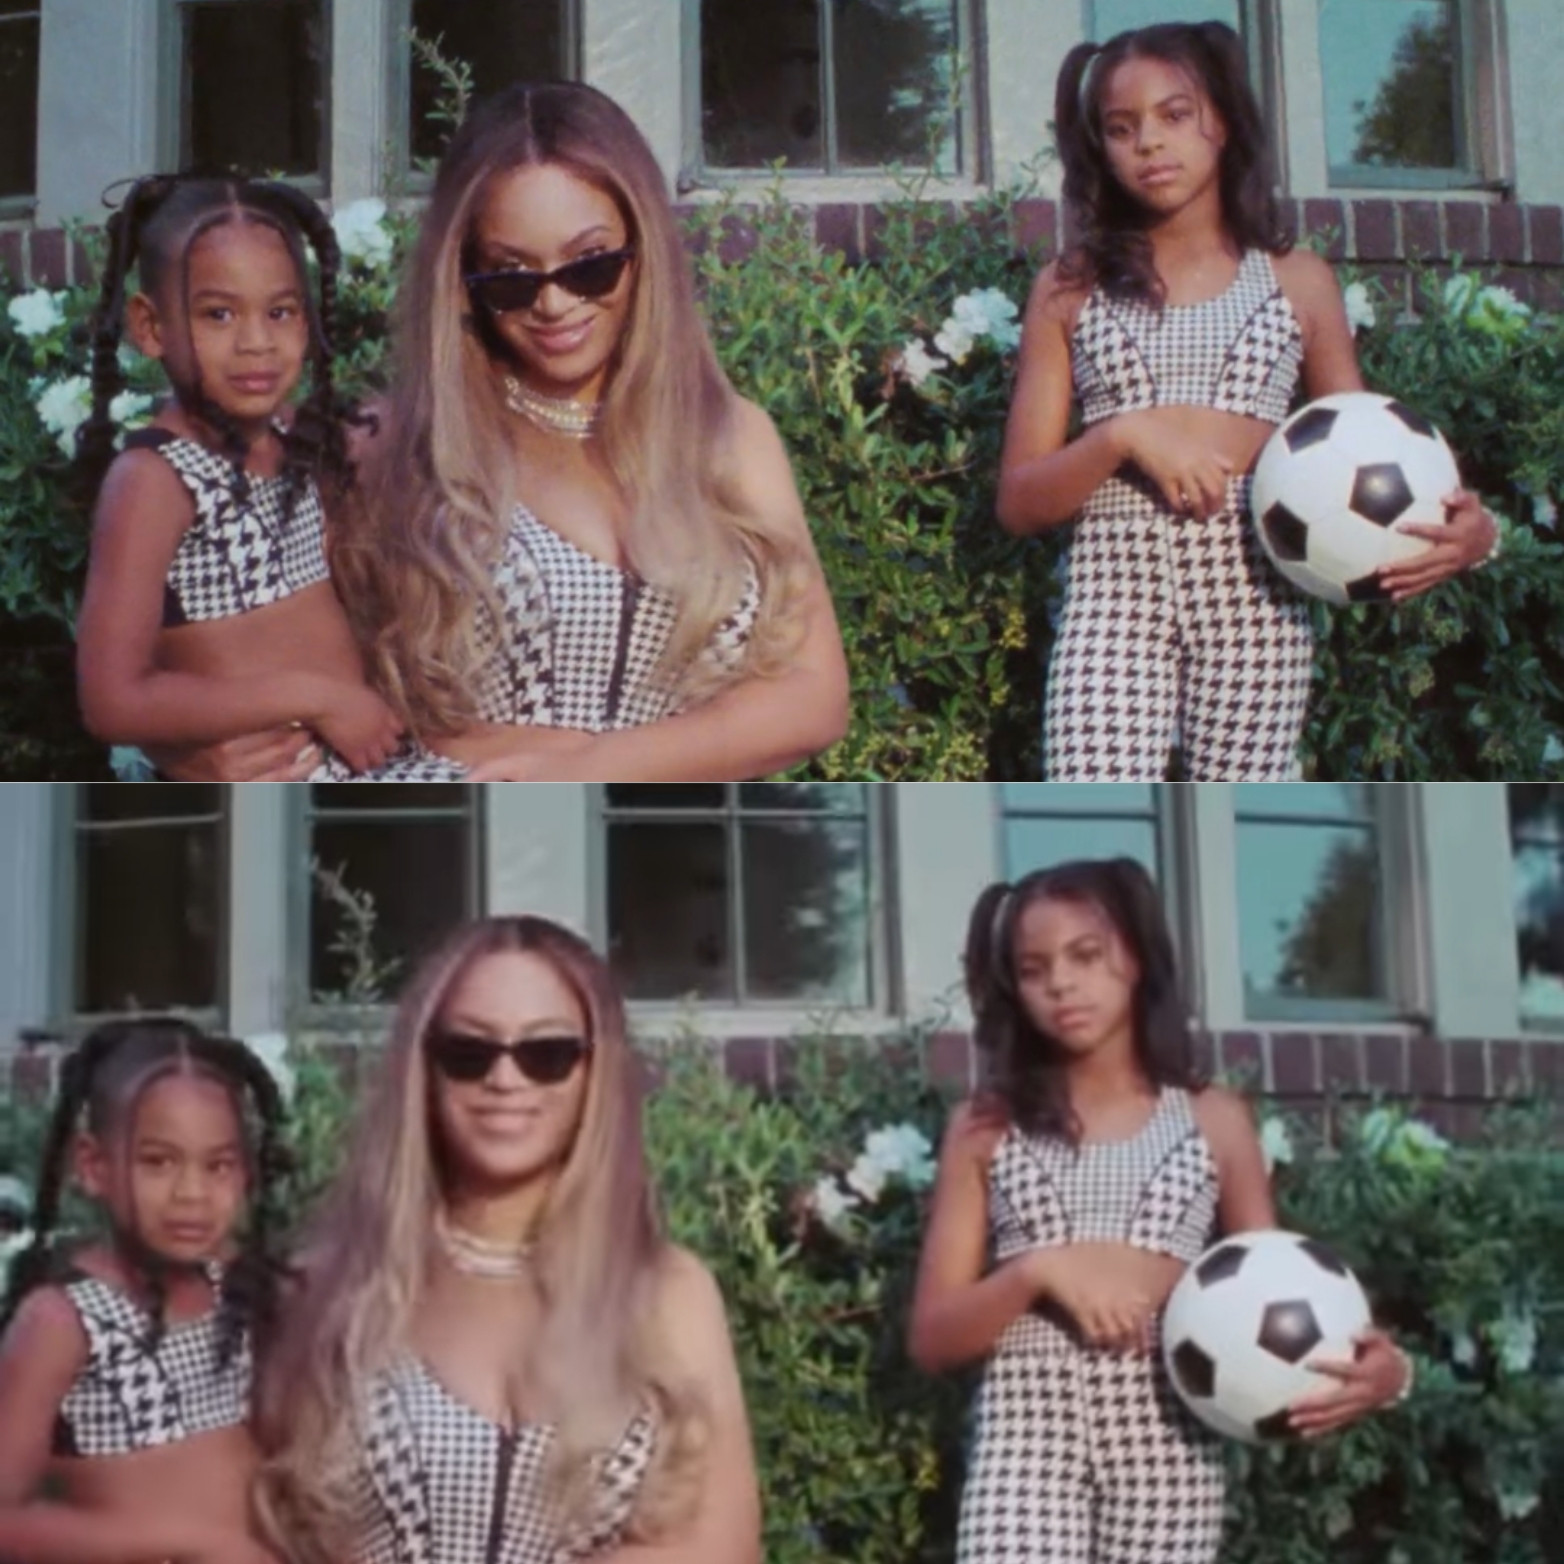 Beyonce shares video of her daughters, Blue Ivy and Rumi Carter (video